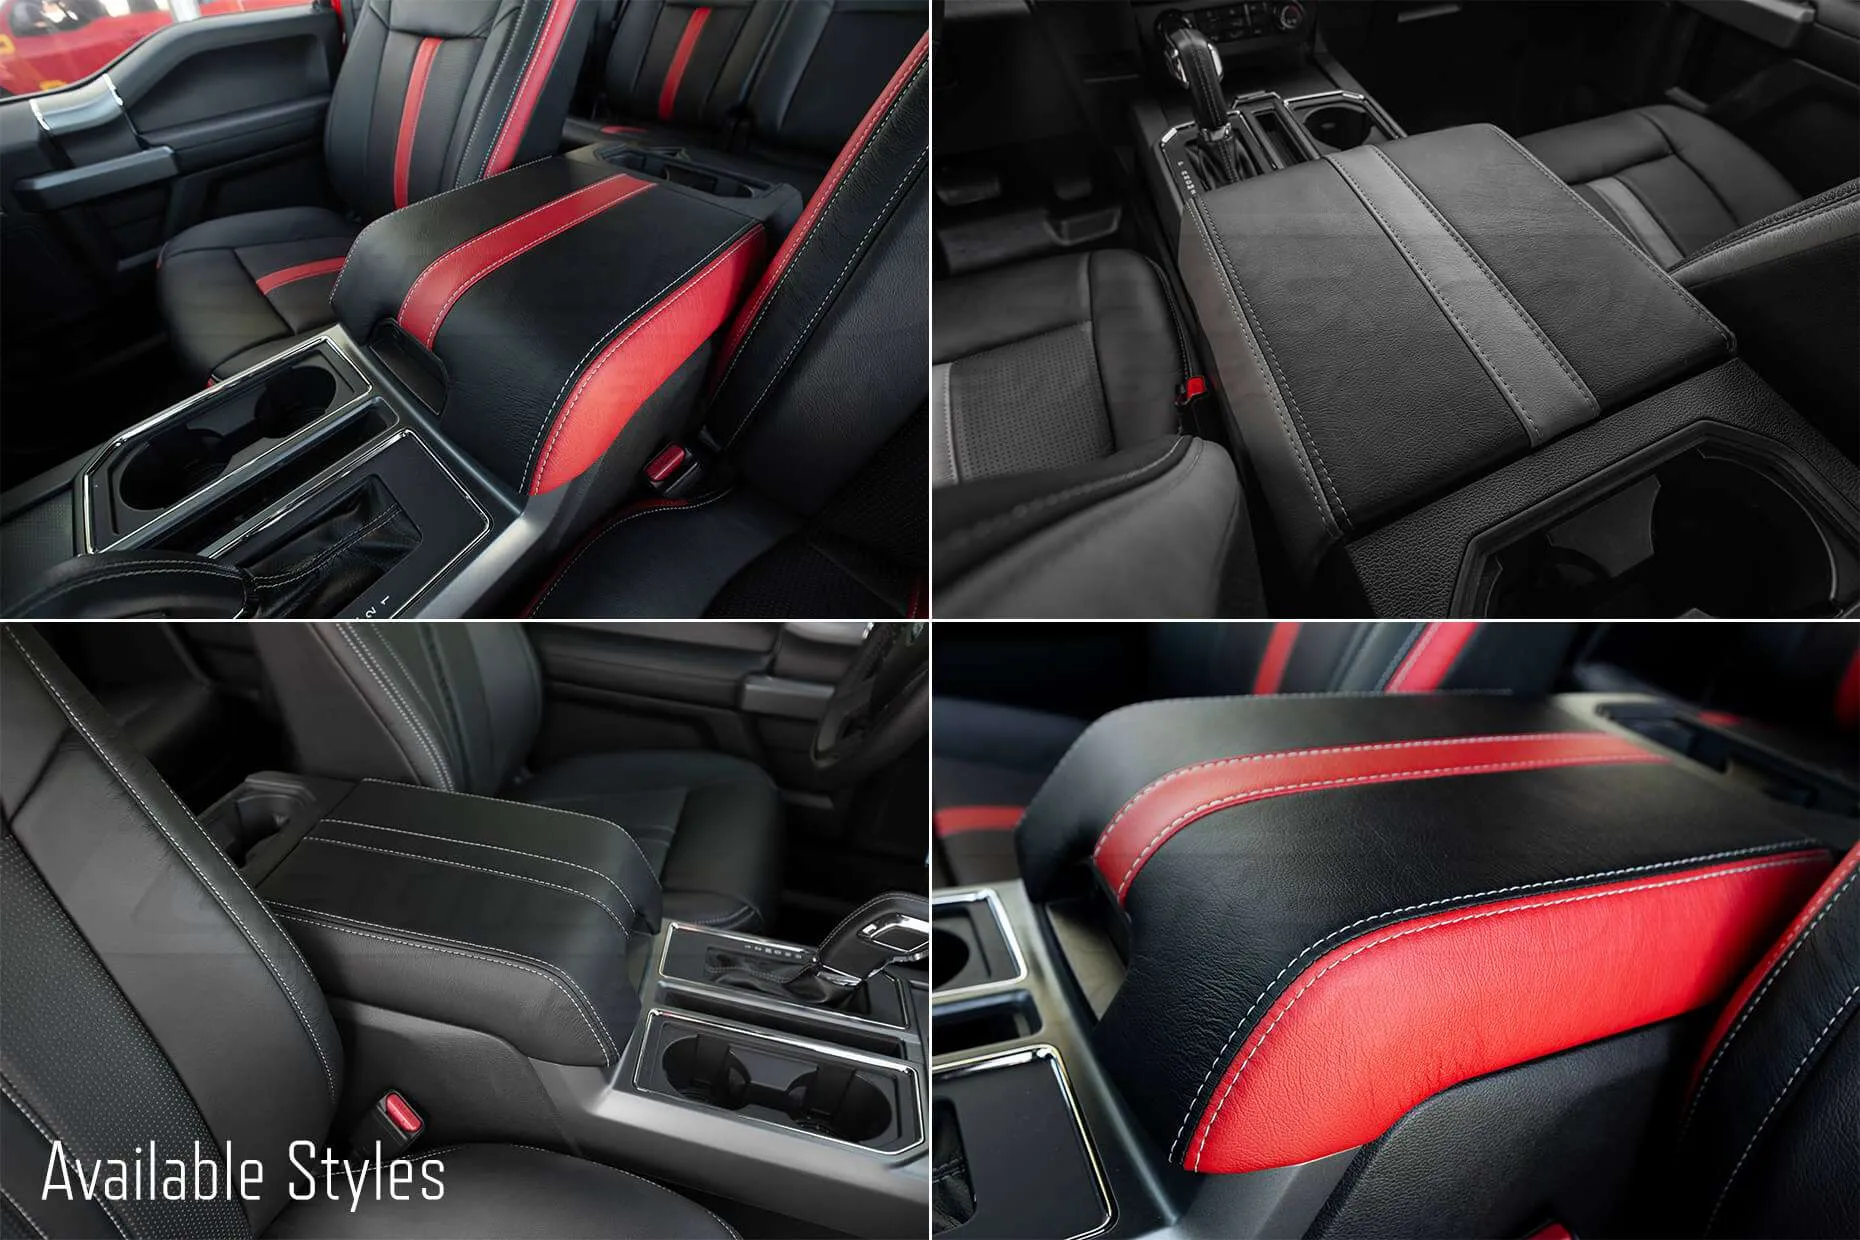 Ford Raptor installed upholstery kit - Black & Bright Red - Console lid styles